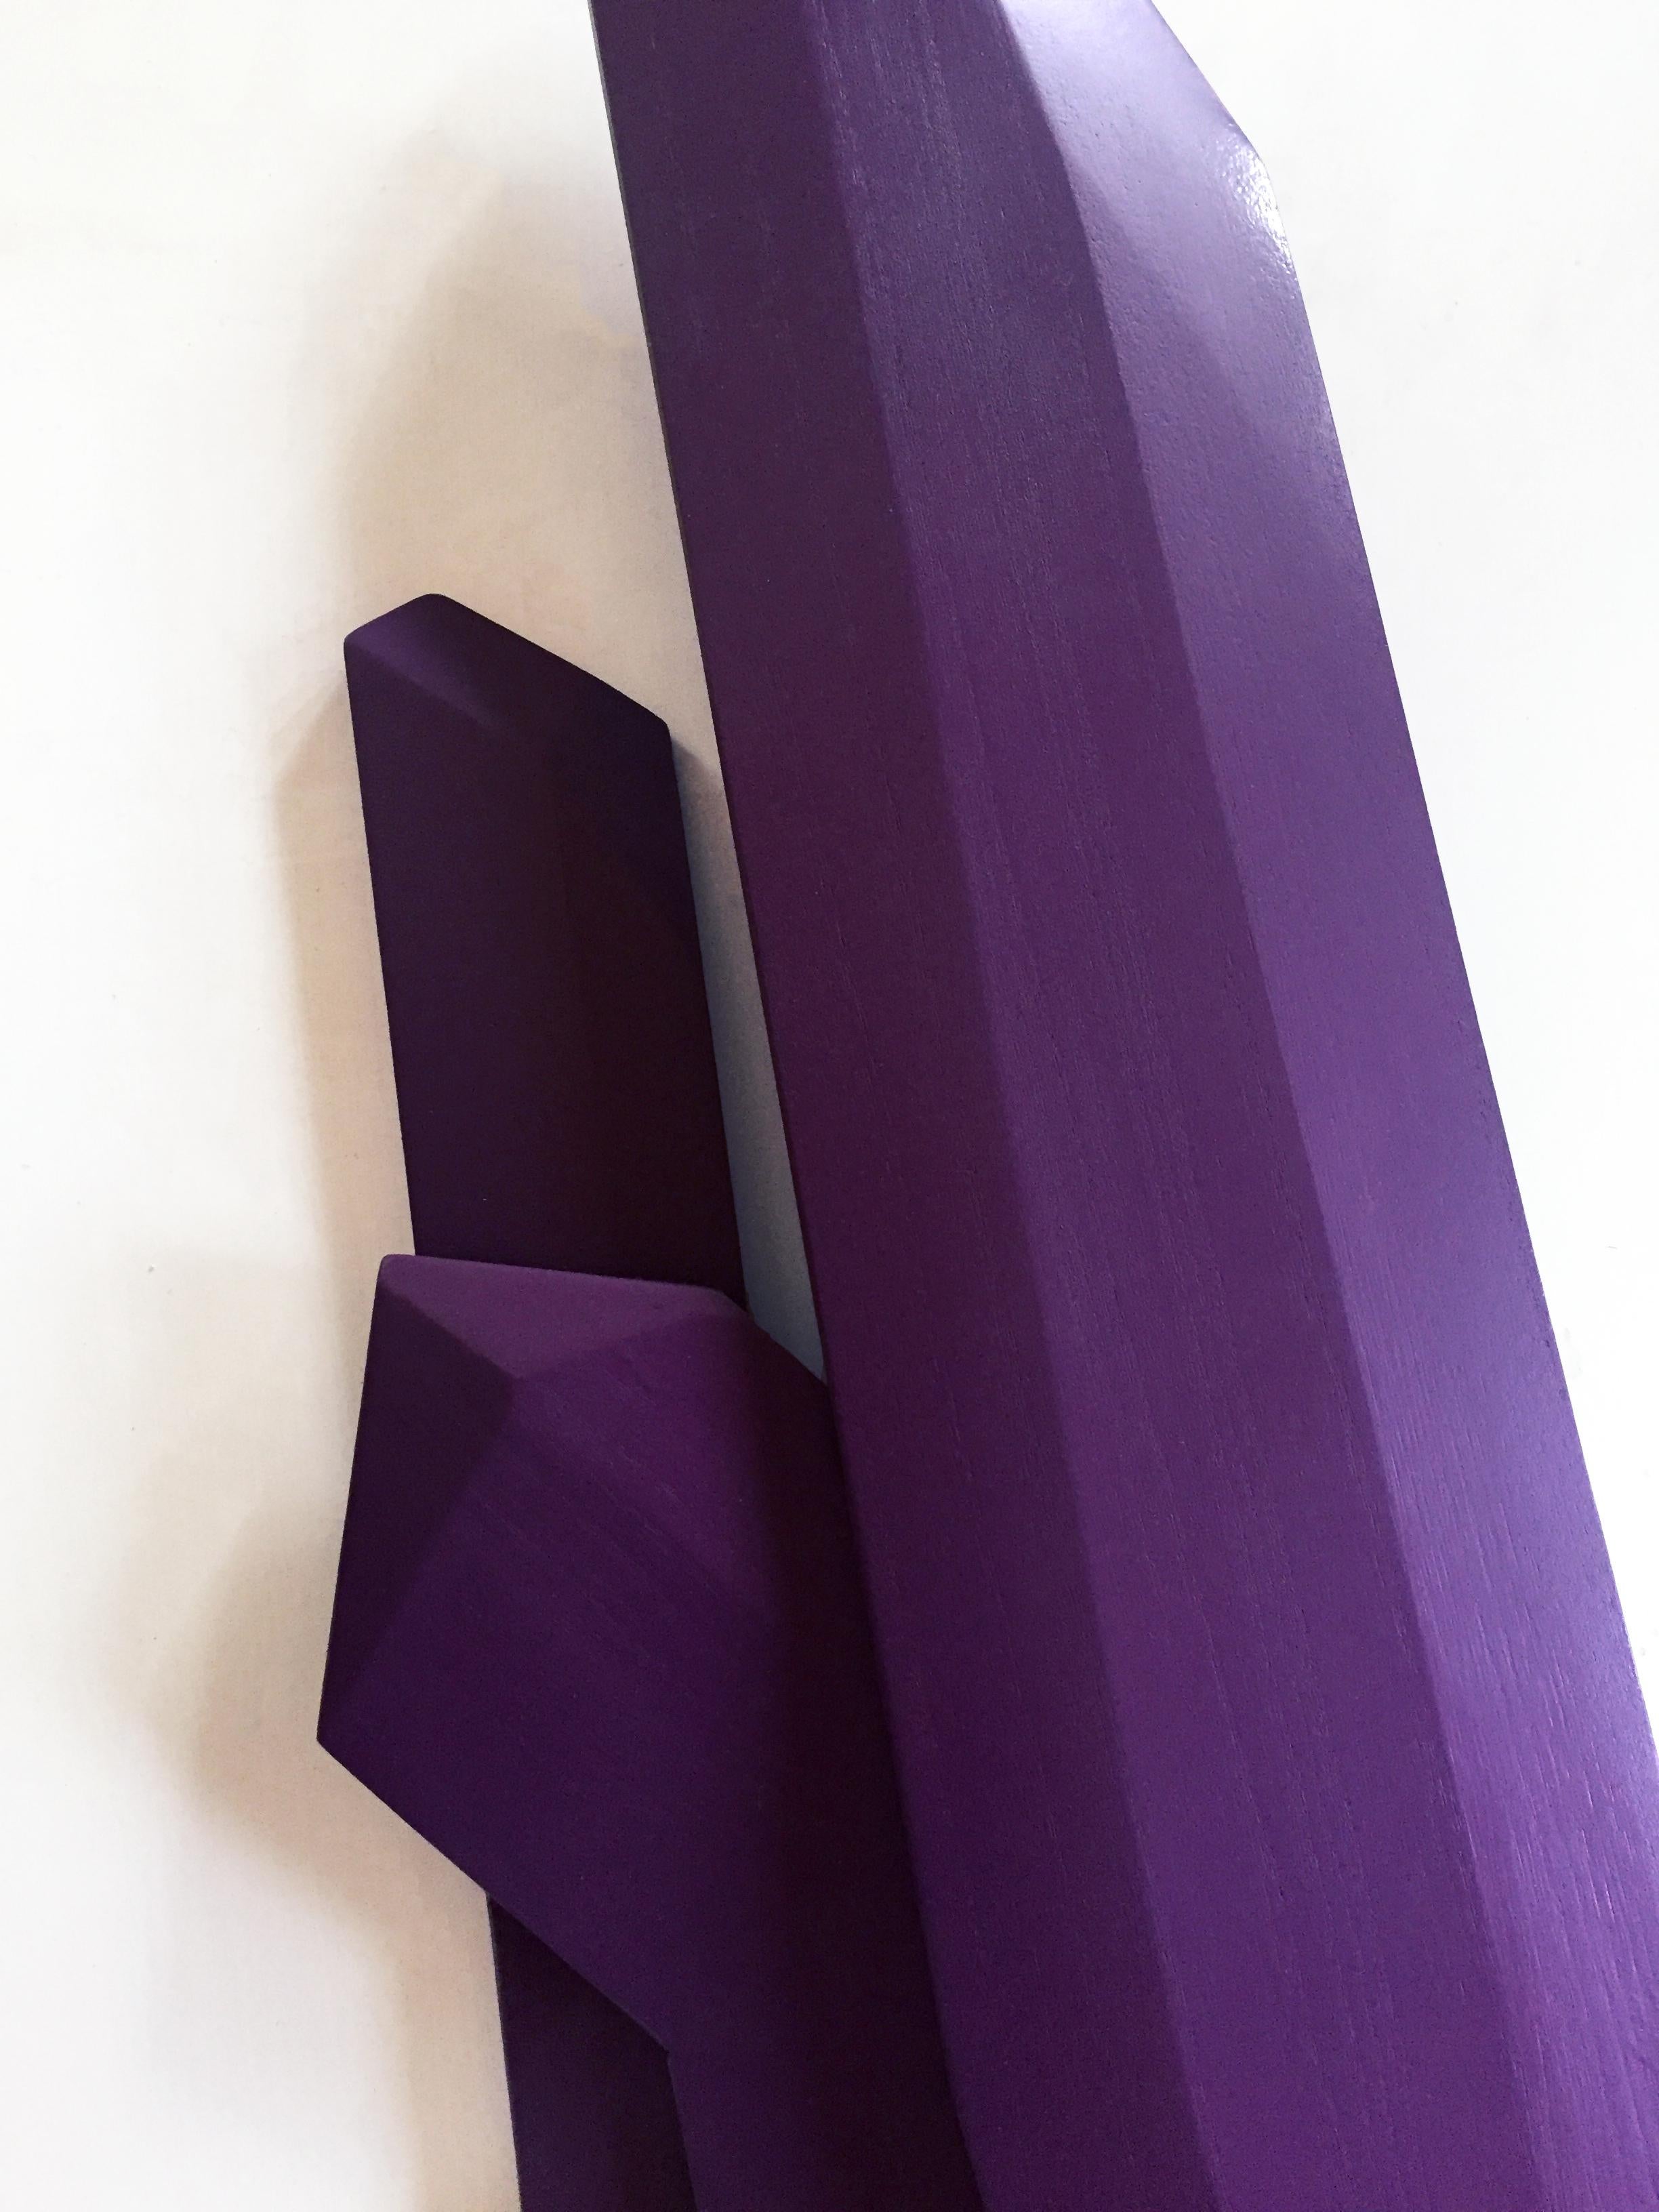 “Ultra Violet Crystals” is a rich plum colored wall sculpture made out of solid wood and then painted and sealed with a UV matte sealer. The geometric facets are hand carved and add intricacy to the structure. This creates a dynamic artwork where